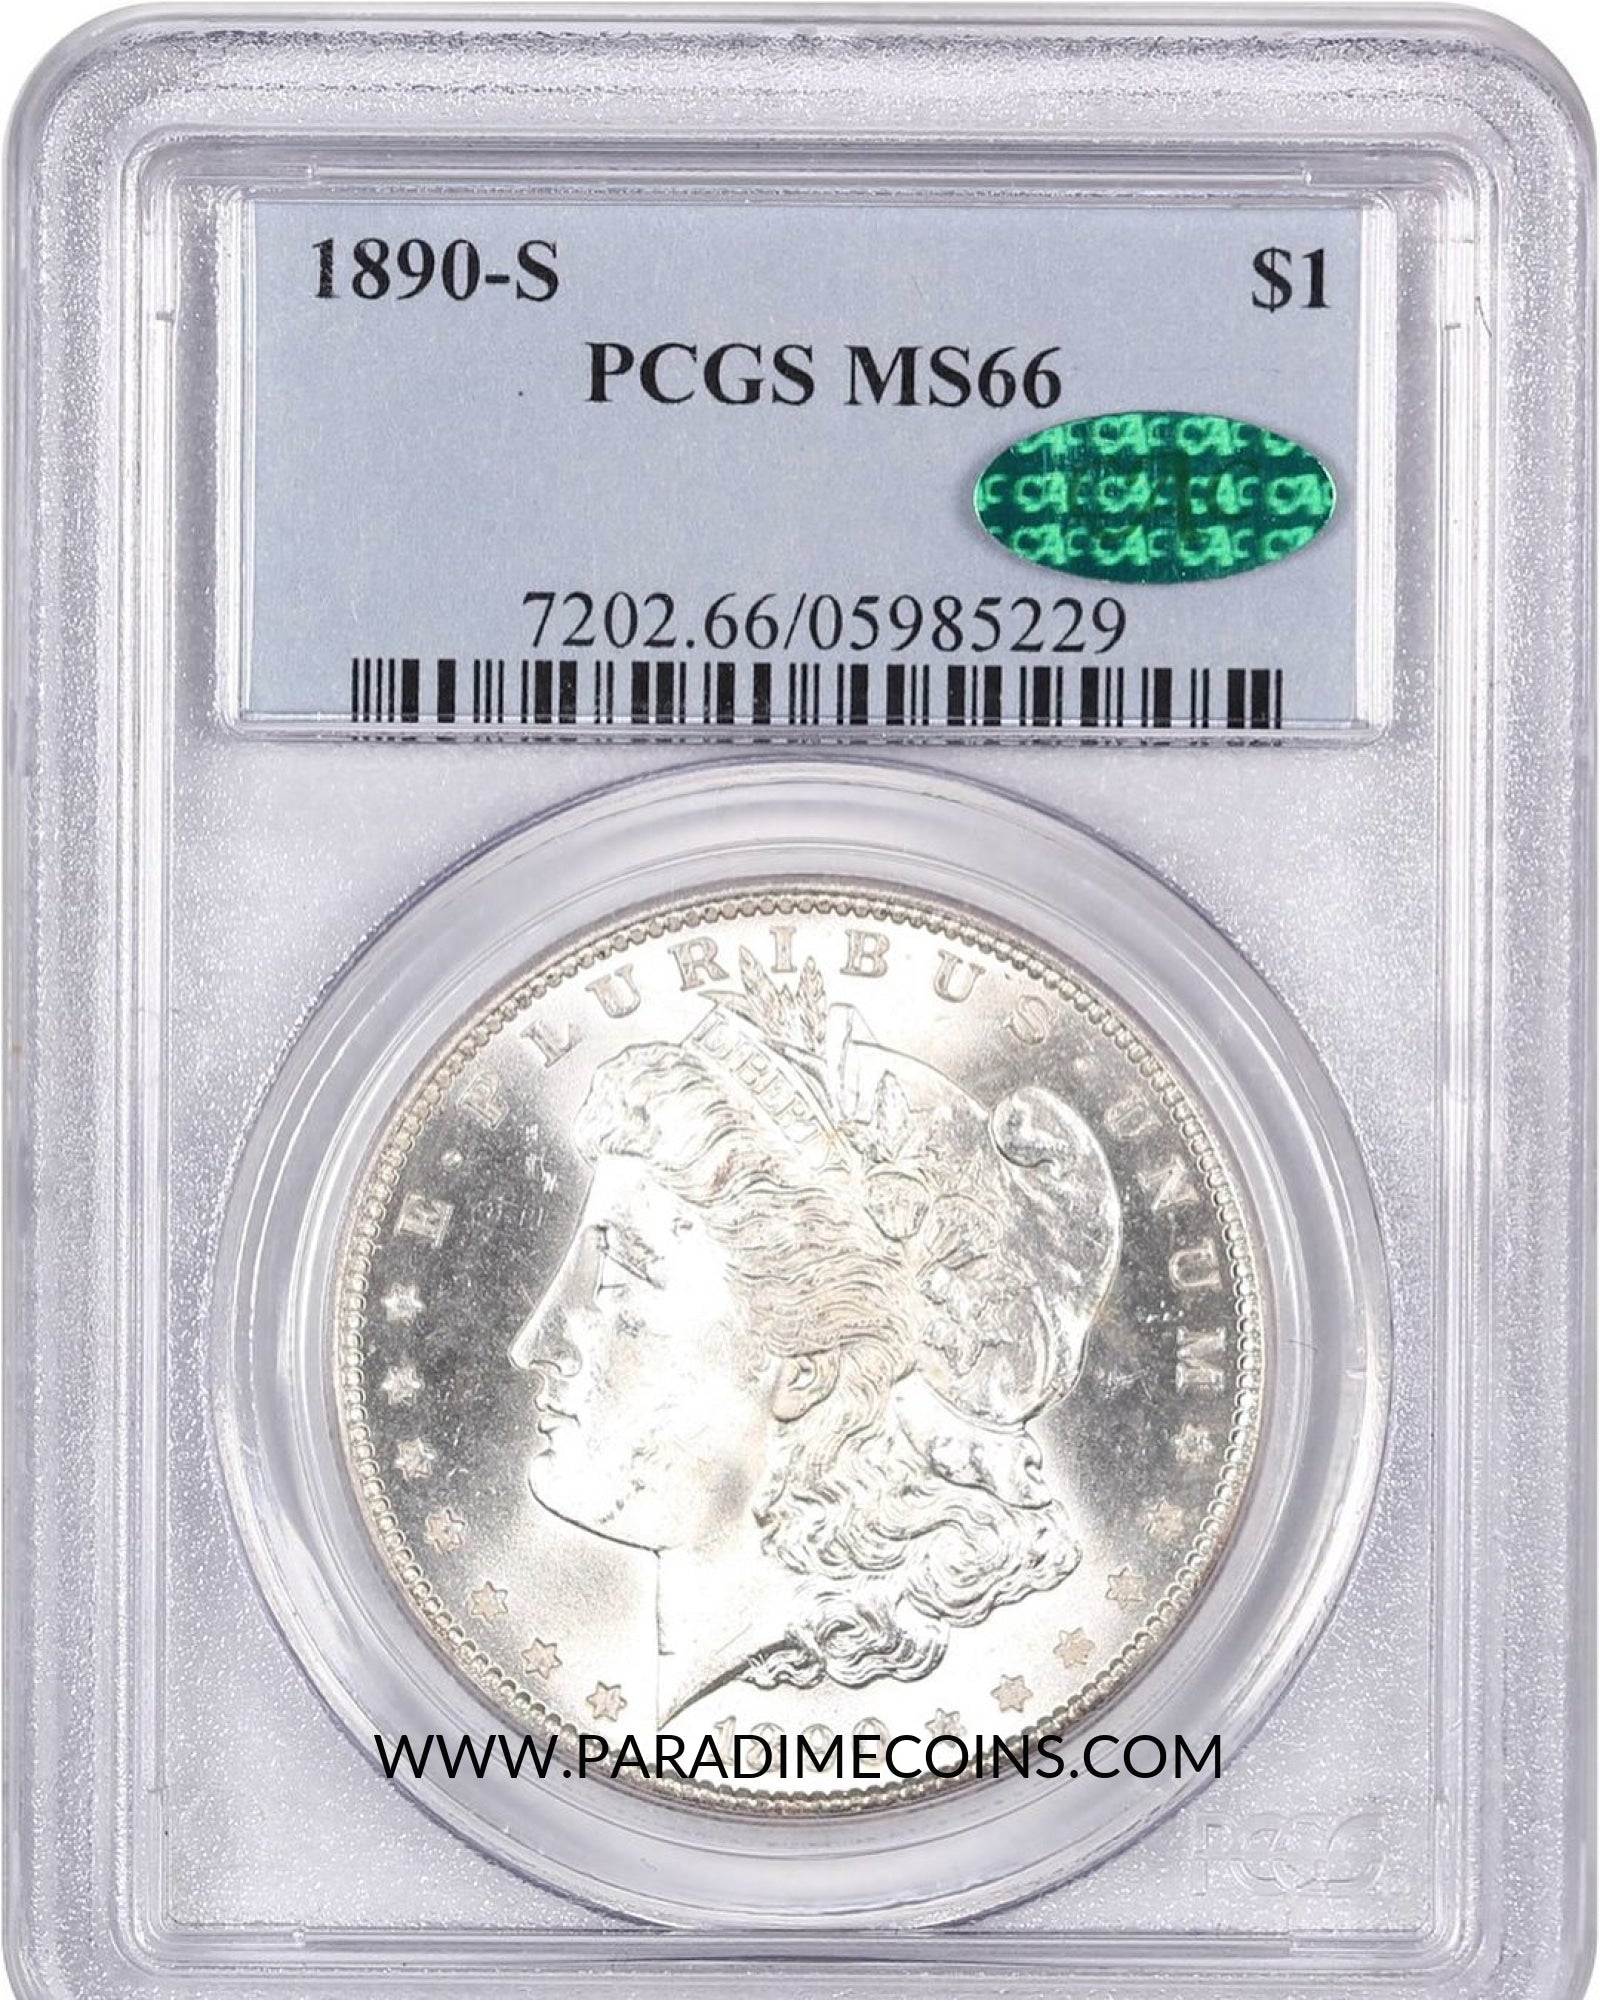 1890-S $1 MS66 PCGS CAC - Paradime Coins | PCGS NGC CACG CAC Rare US Numismatic Coins For Sale